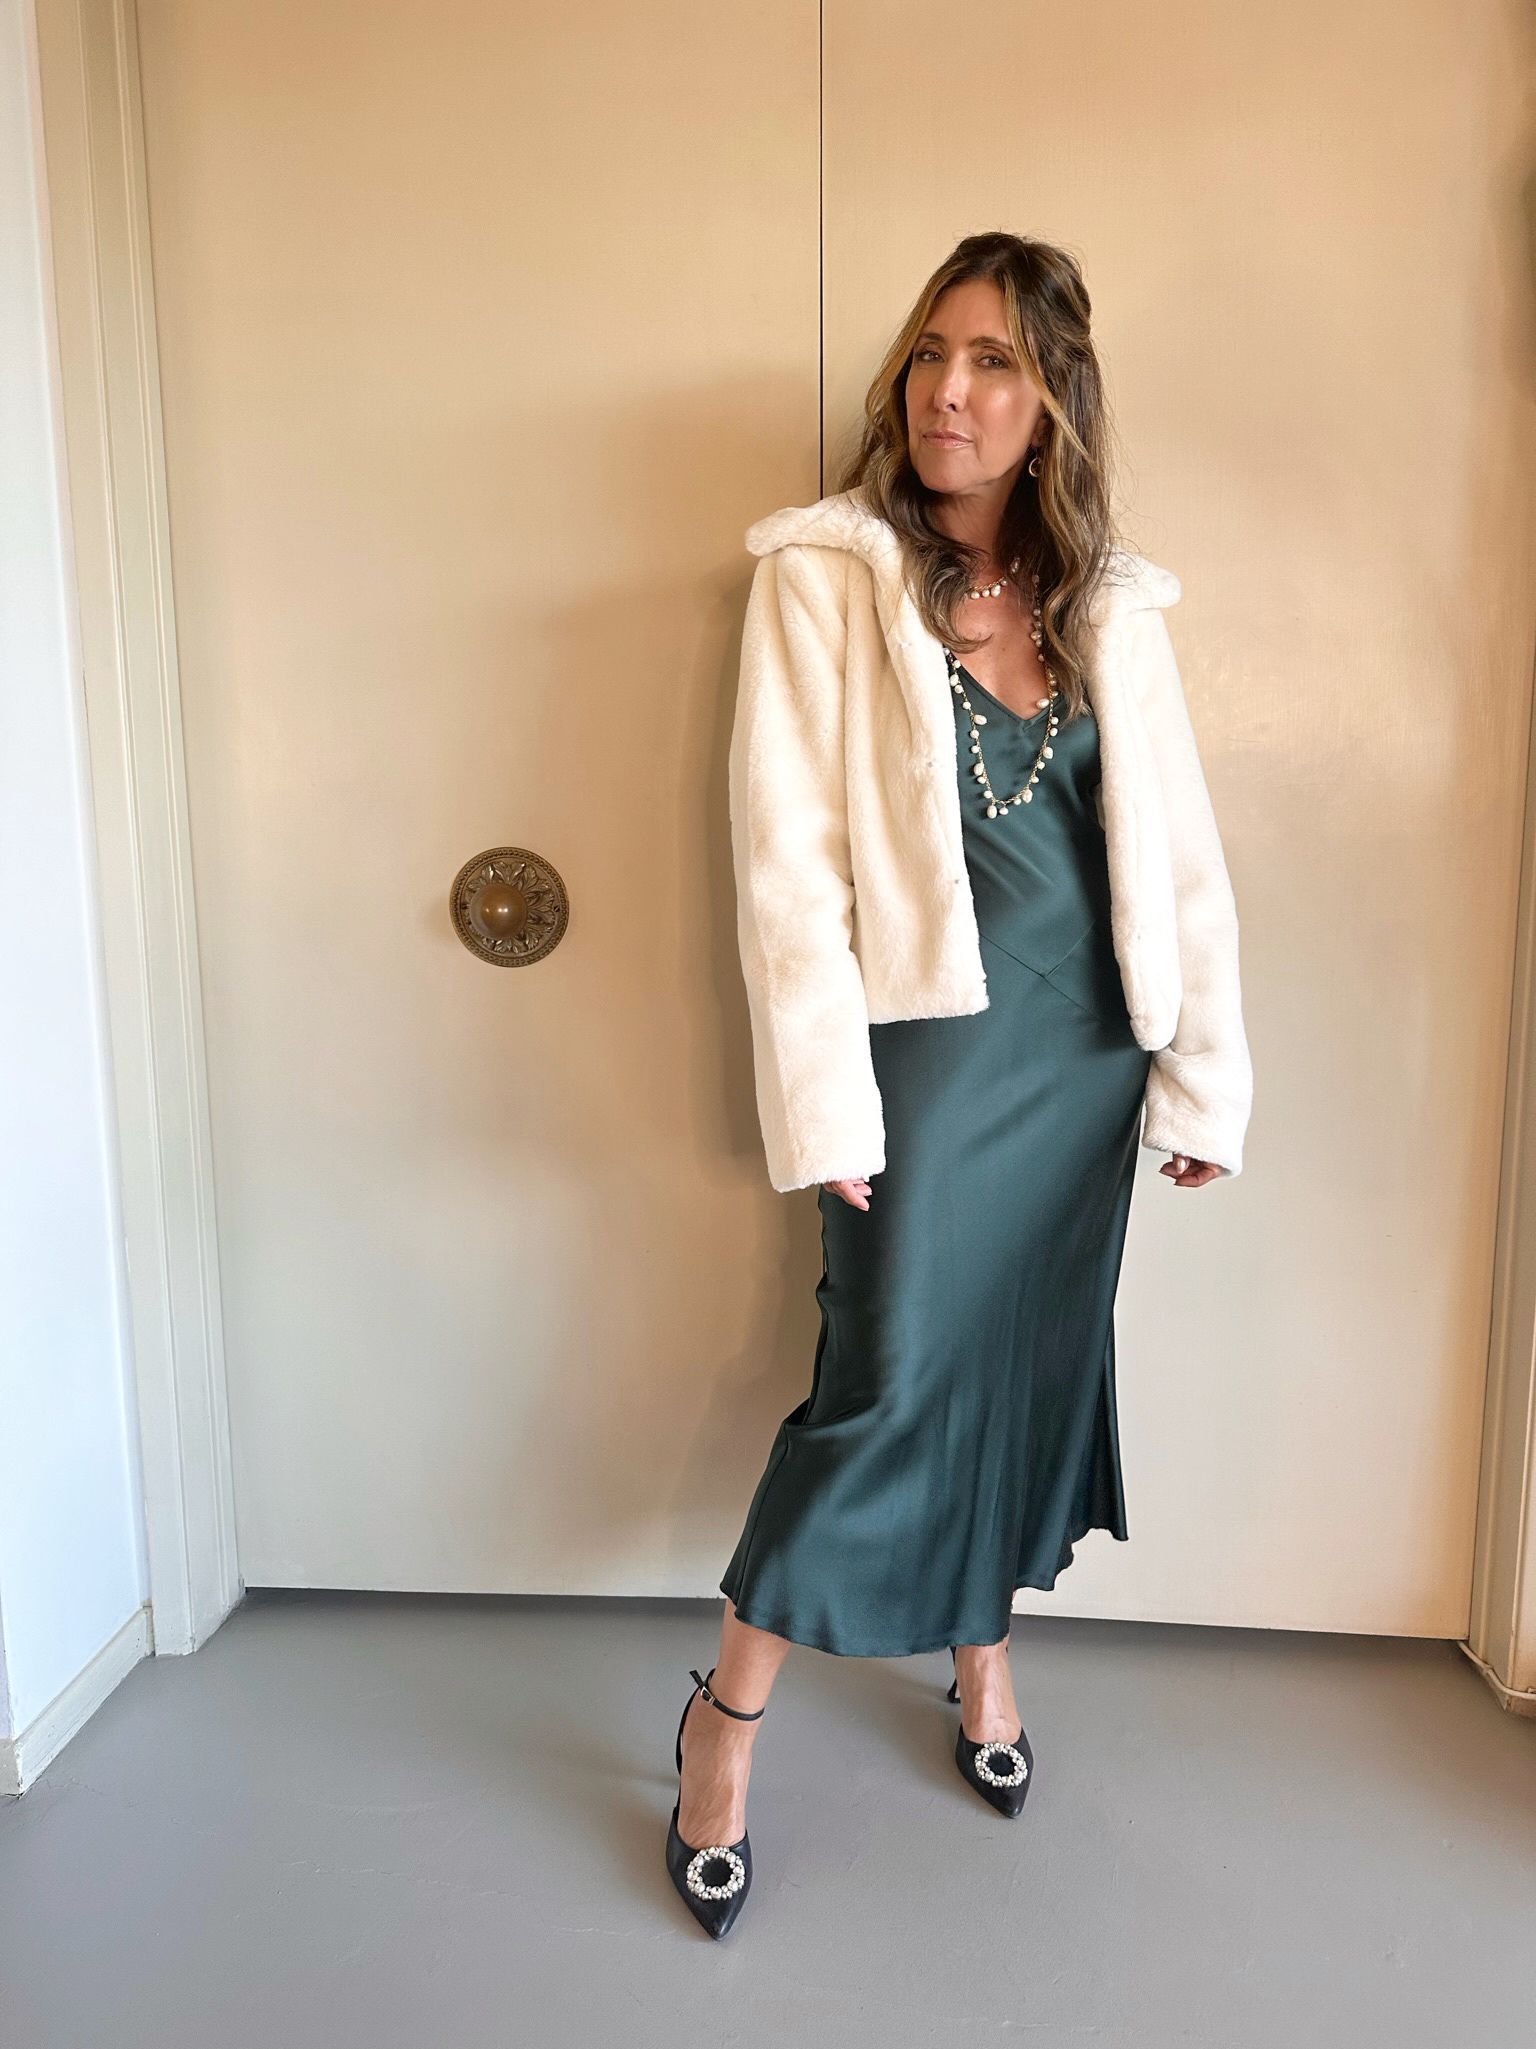 How to style a slip dress for the holidays, style a slip dress for cold weather, wearing a slip dress in winter, melissa meyers, the glow girl, erin Busbee, fashion over 40, Busbee Style